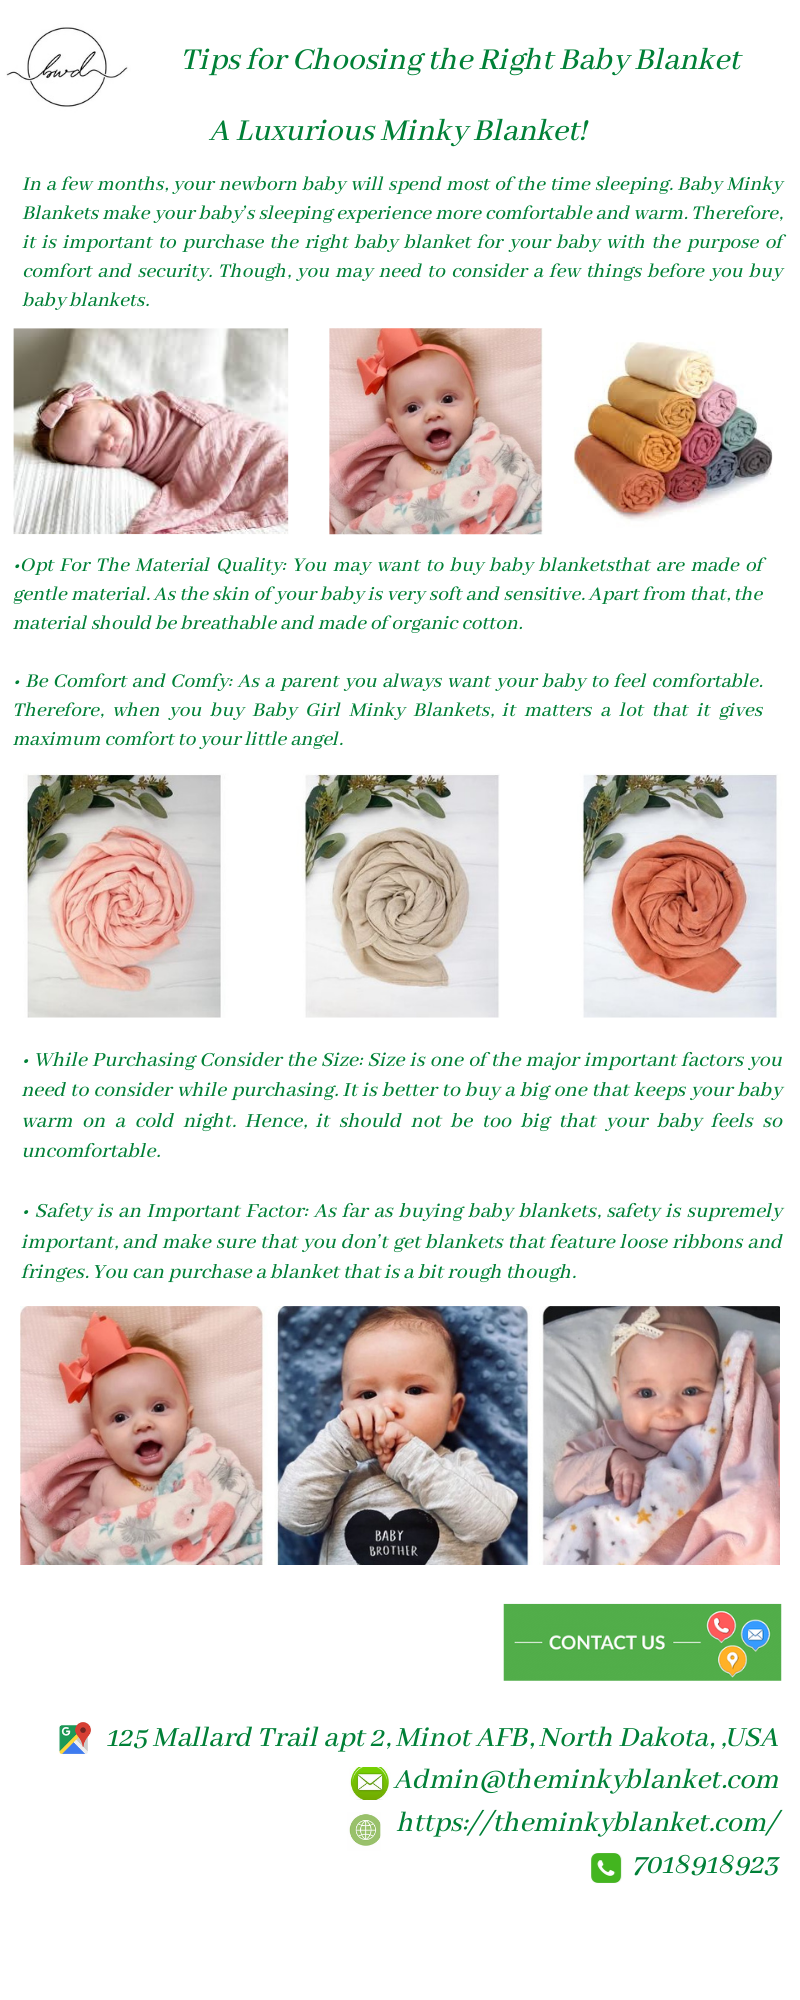 Tips for Choosing the Right Baby Blanket - Extraimage